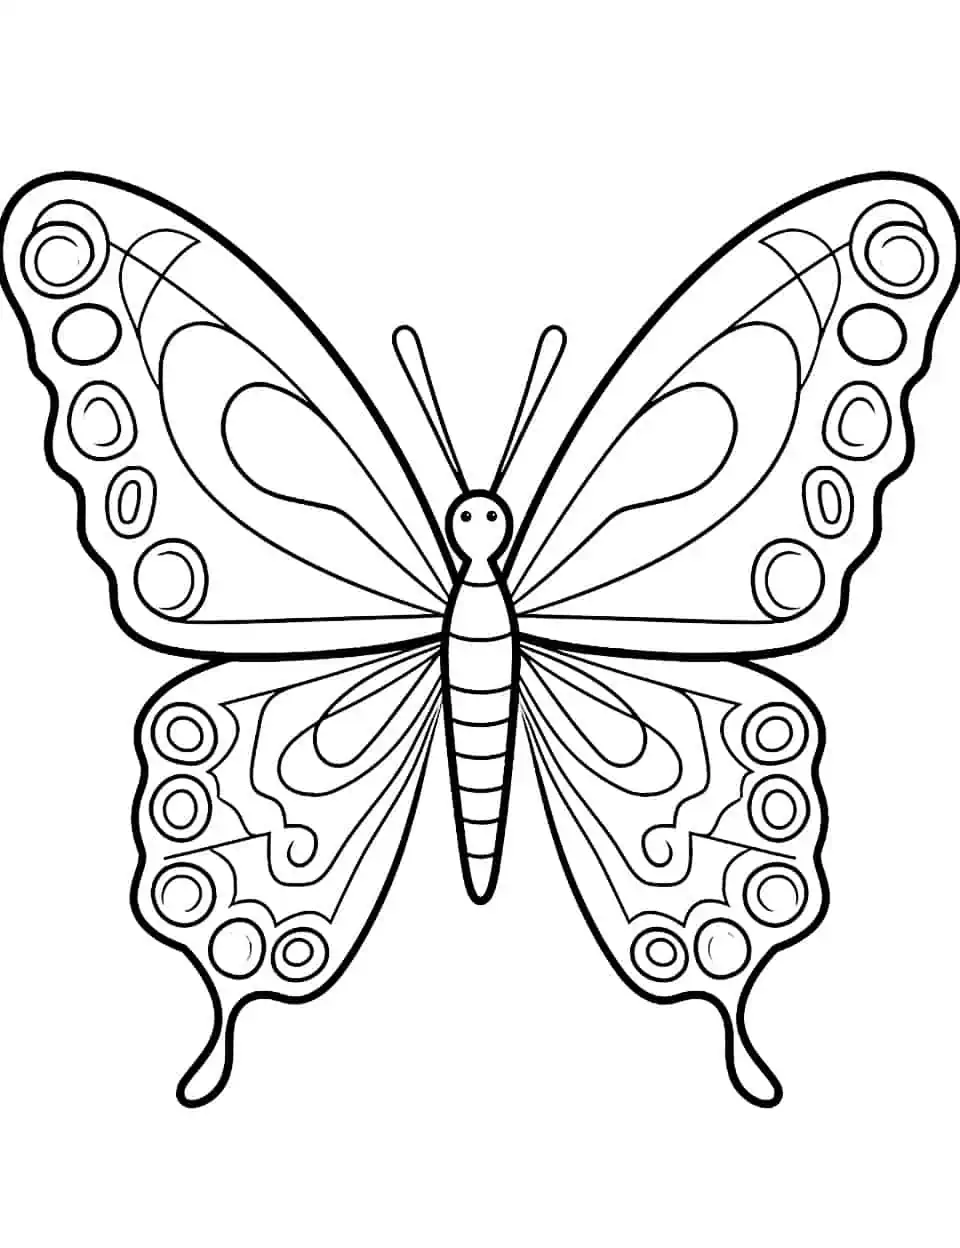 Artistic Abstraction Butterfly Coloring Page - A coloring page with a butterfly design that encourages artistic expression and creativity.